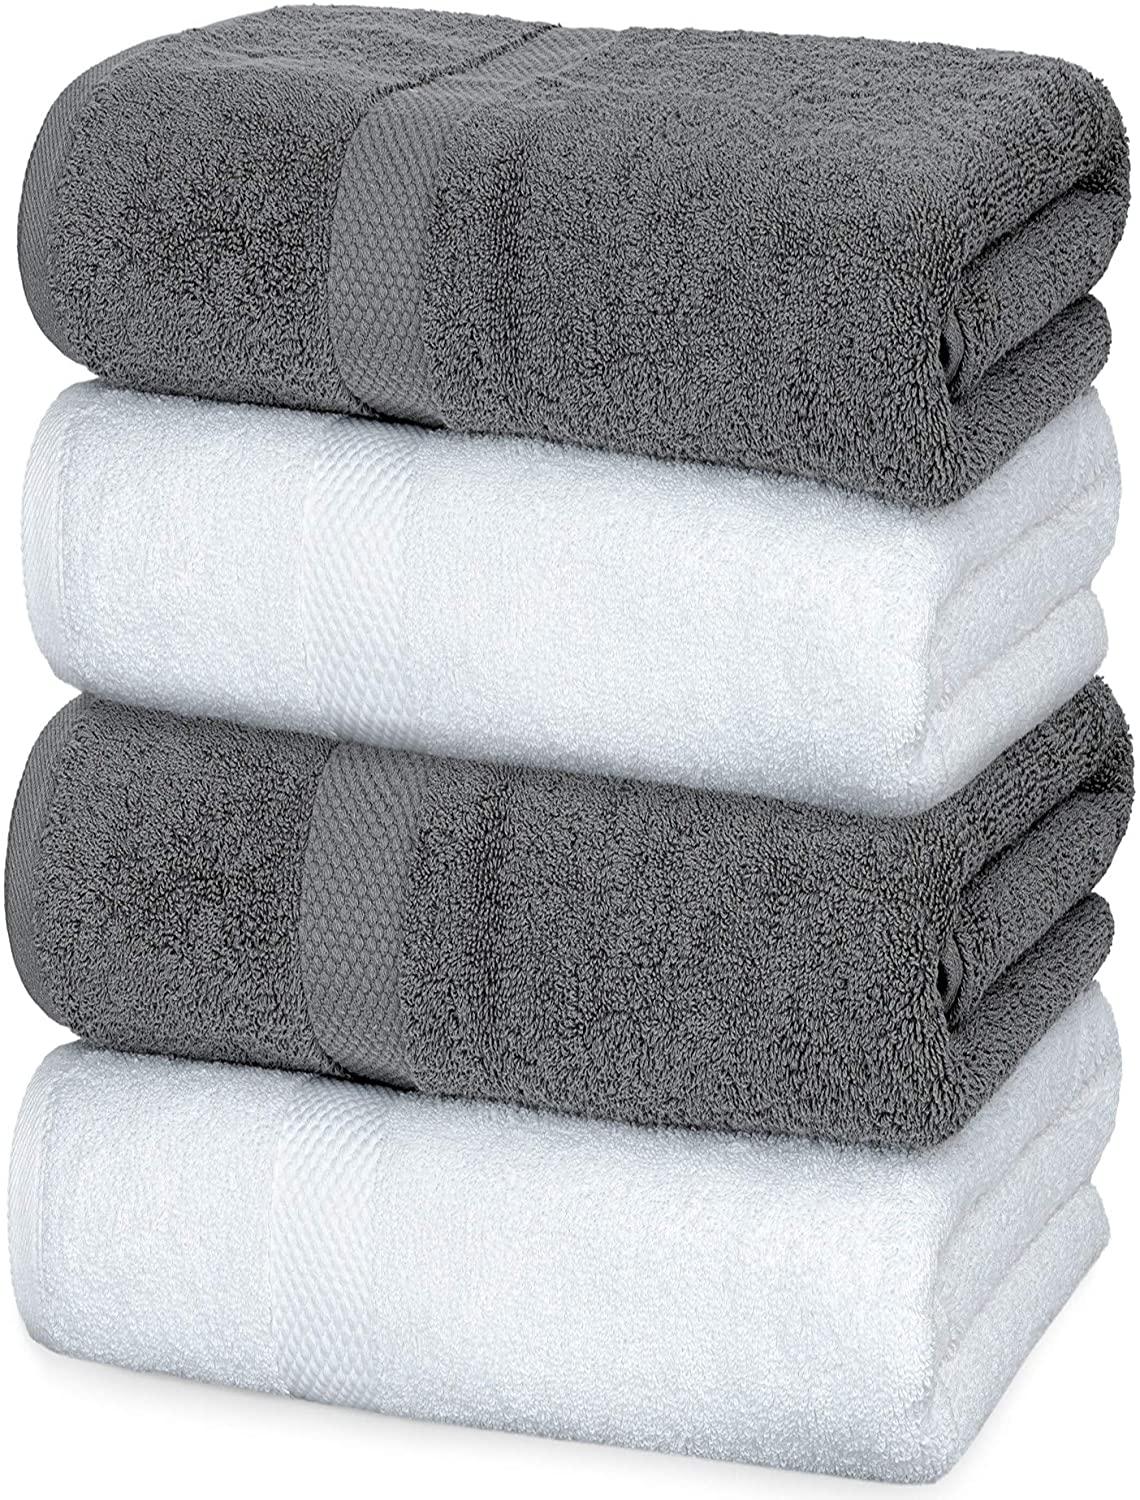 Give Your Bathroom a Refresh With This Spa-quality Towel Set That Shoppers Say Is Like 'Staying in a Hotel'